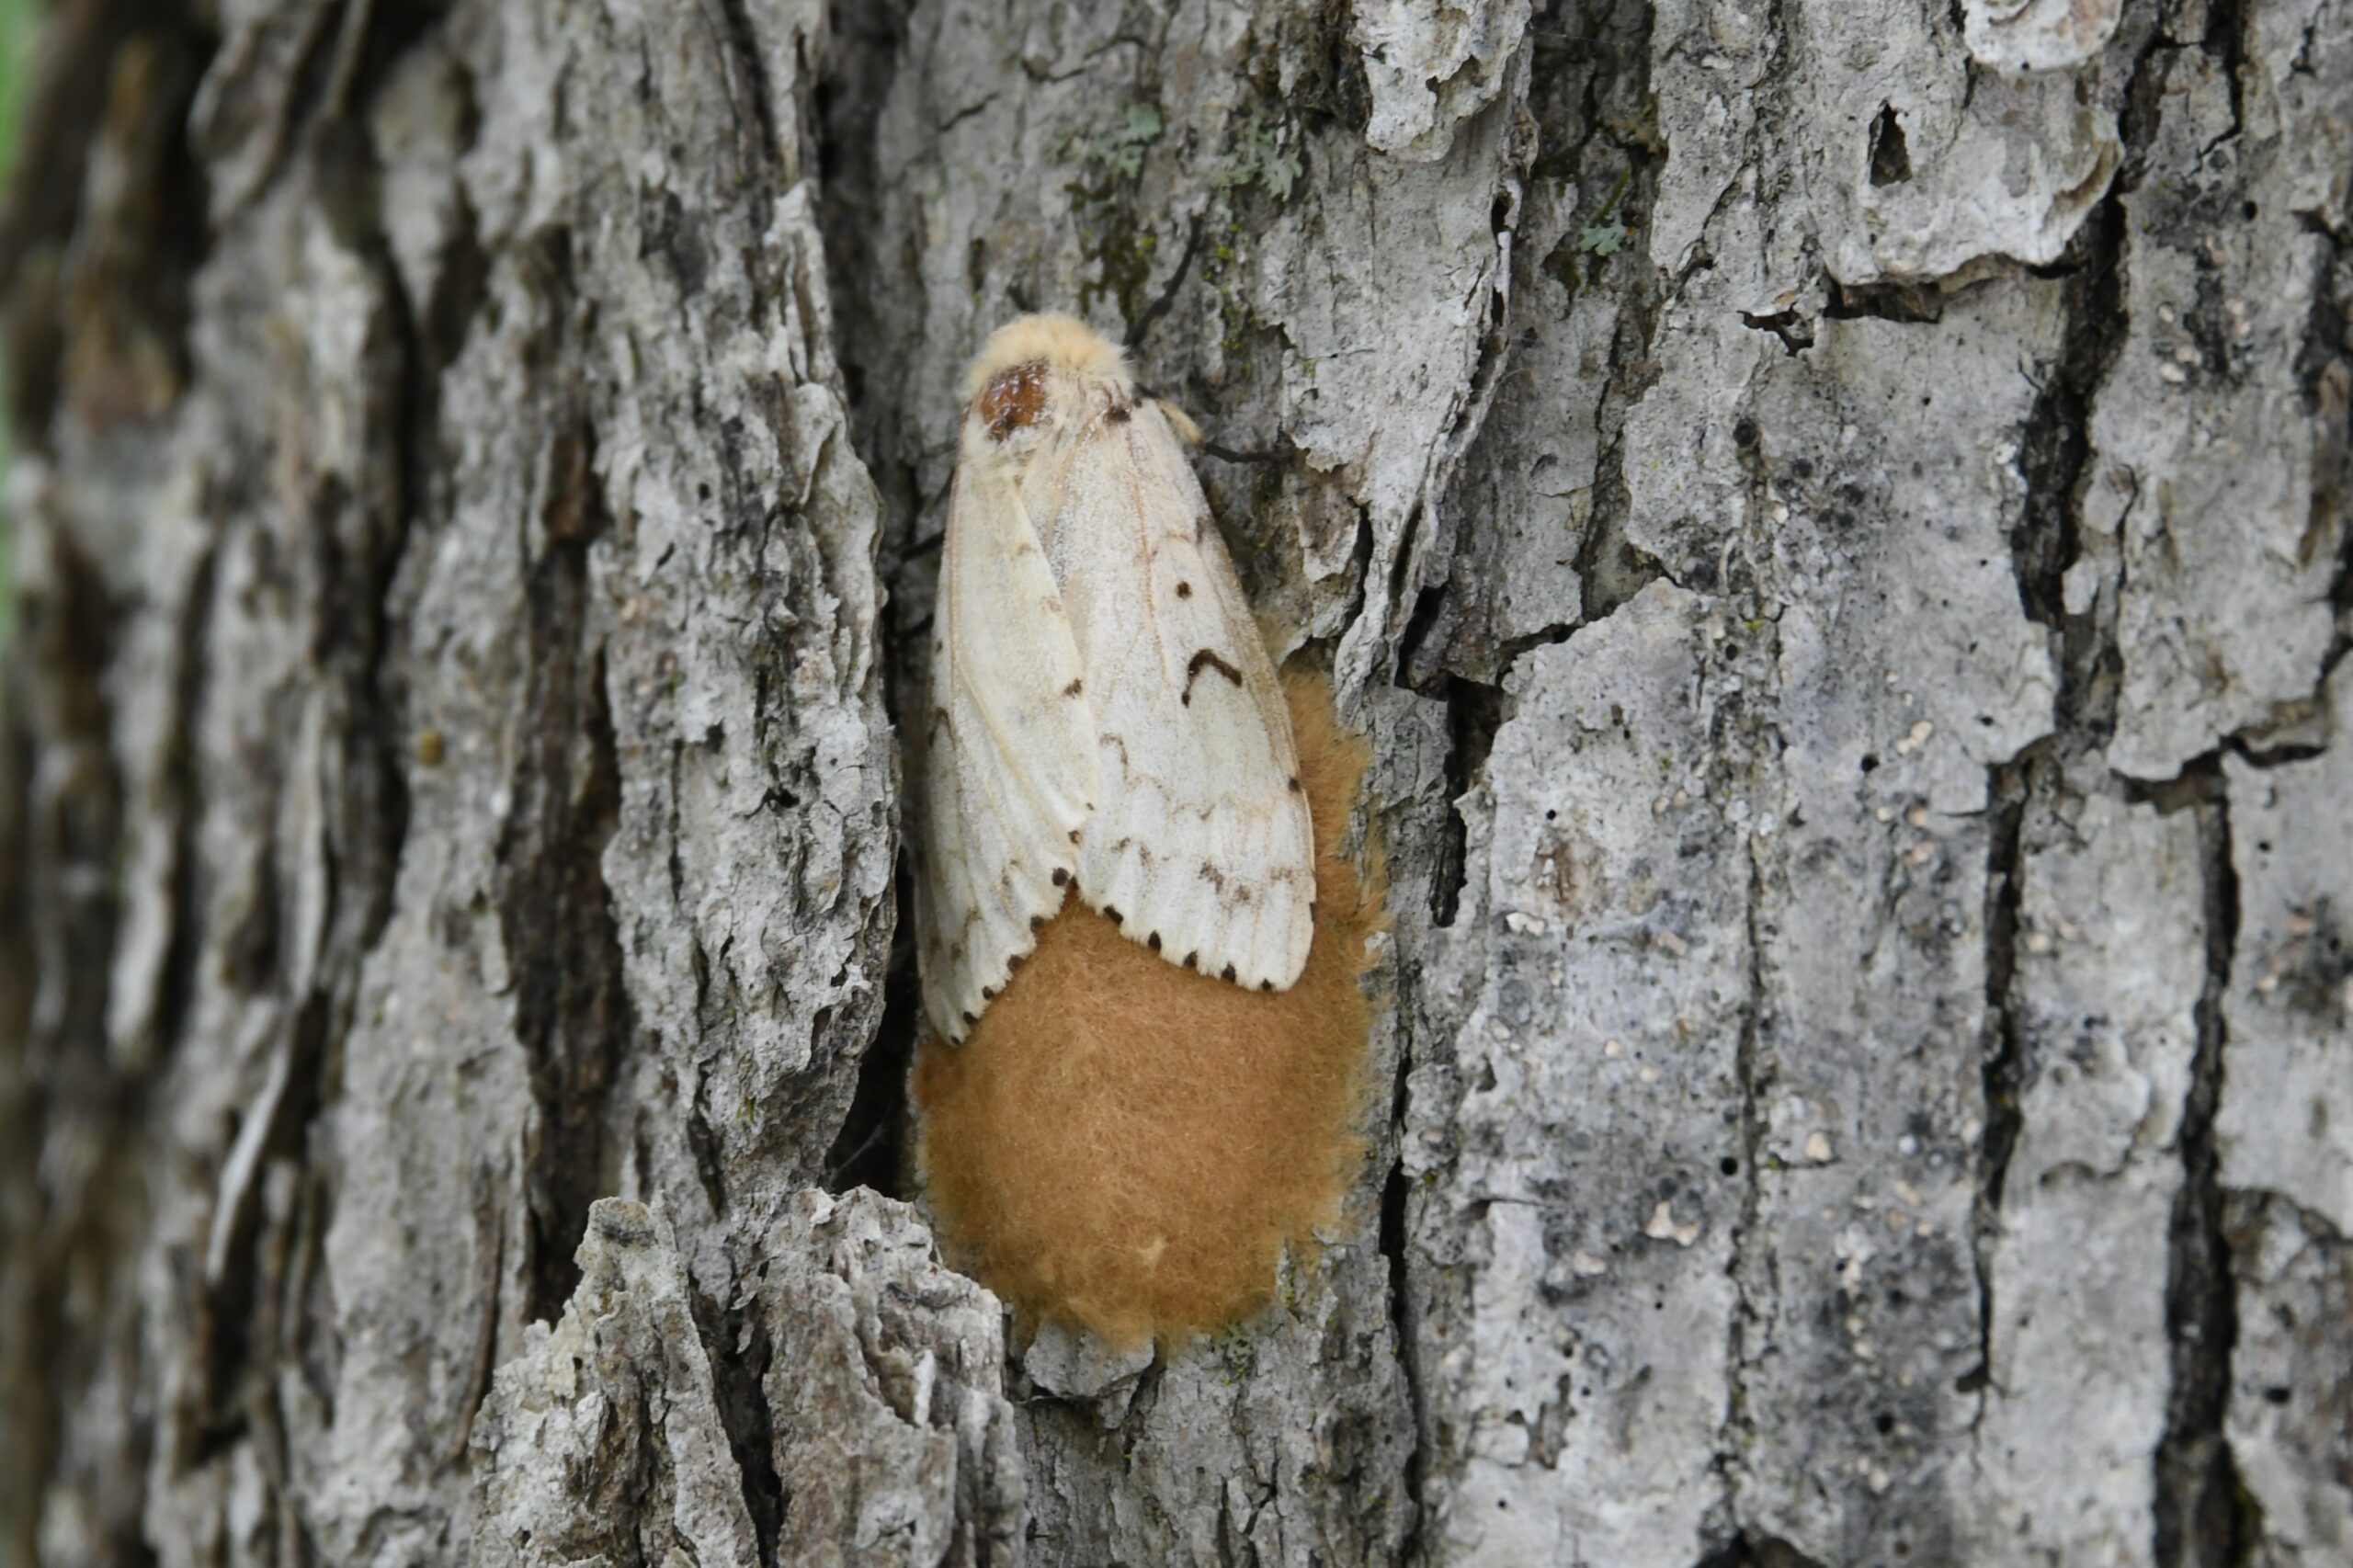 Close up of female adult spongy moth and egg mass on tree bark